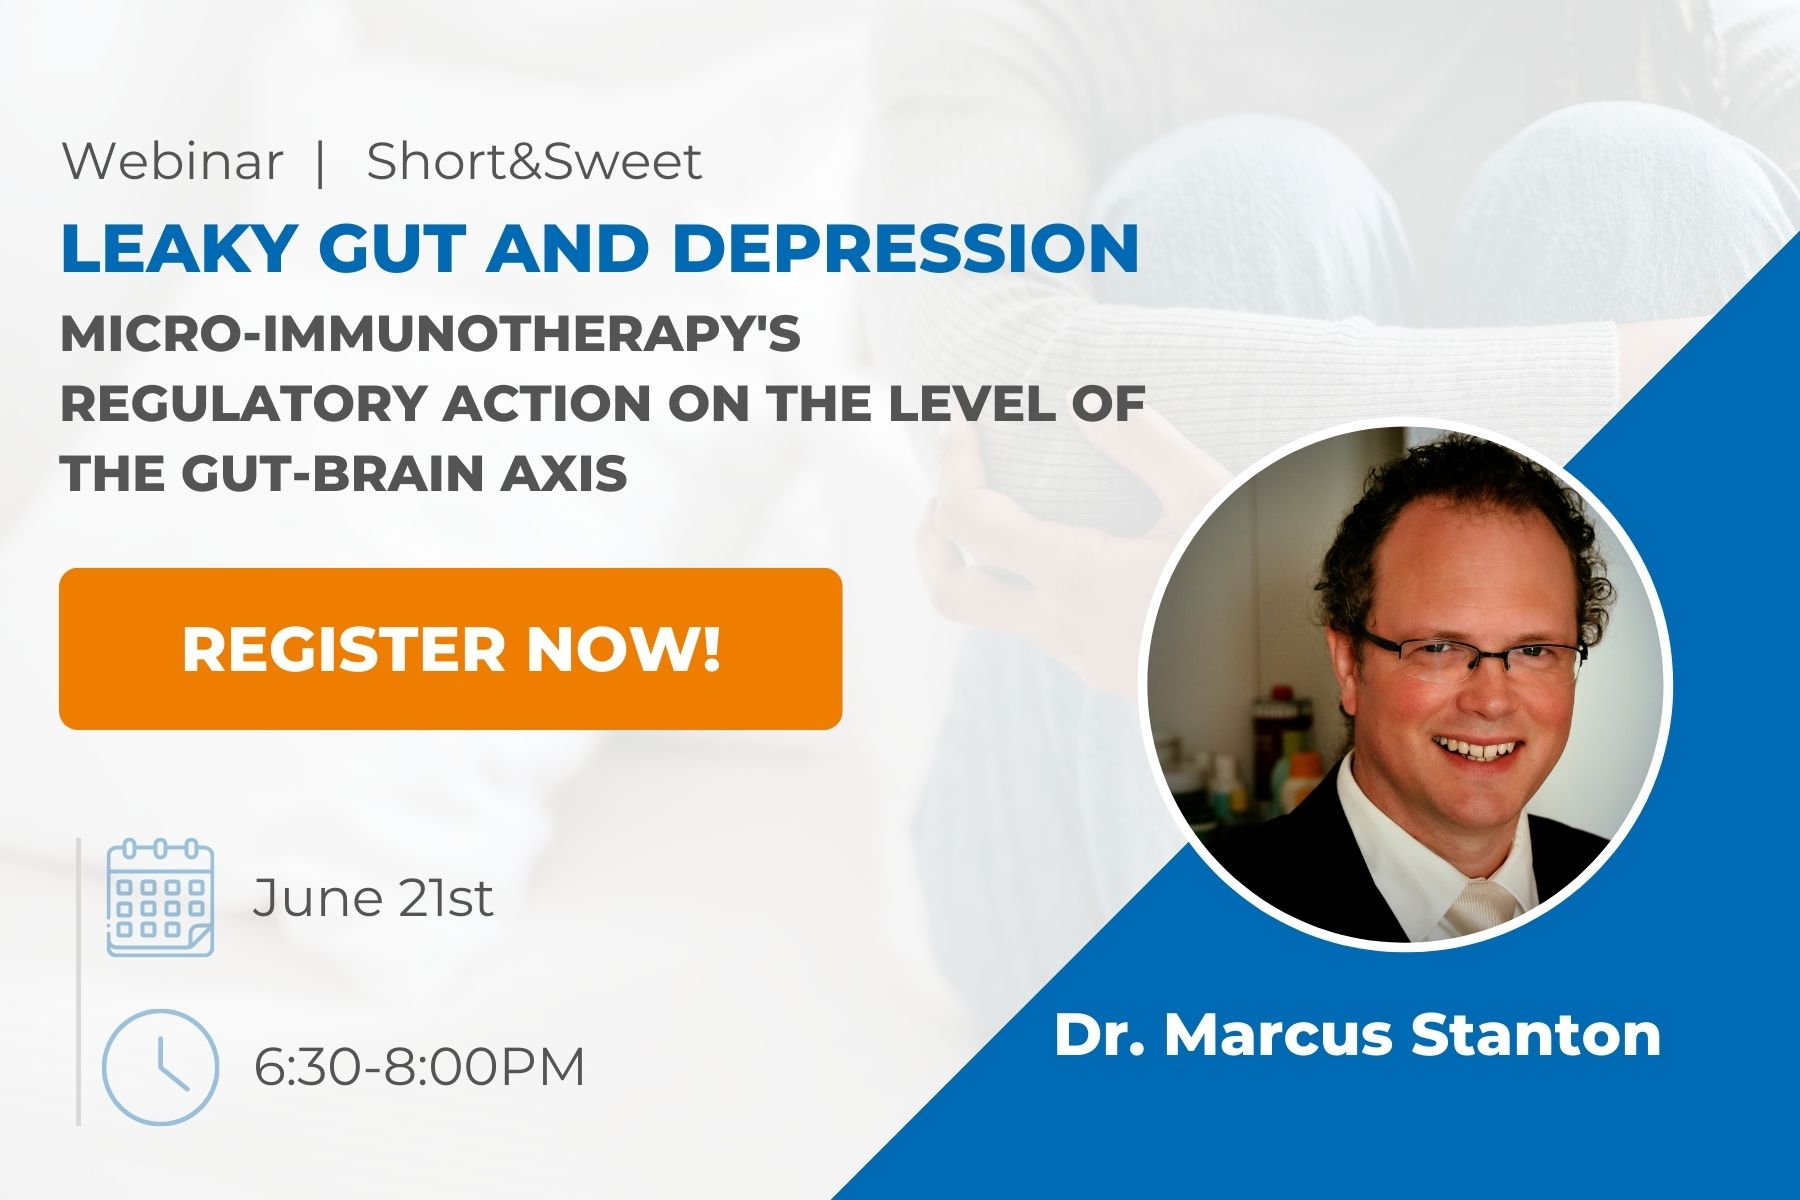 Register Now for Micro-immunotherapy action on the level of the gut-brain axis